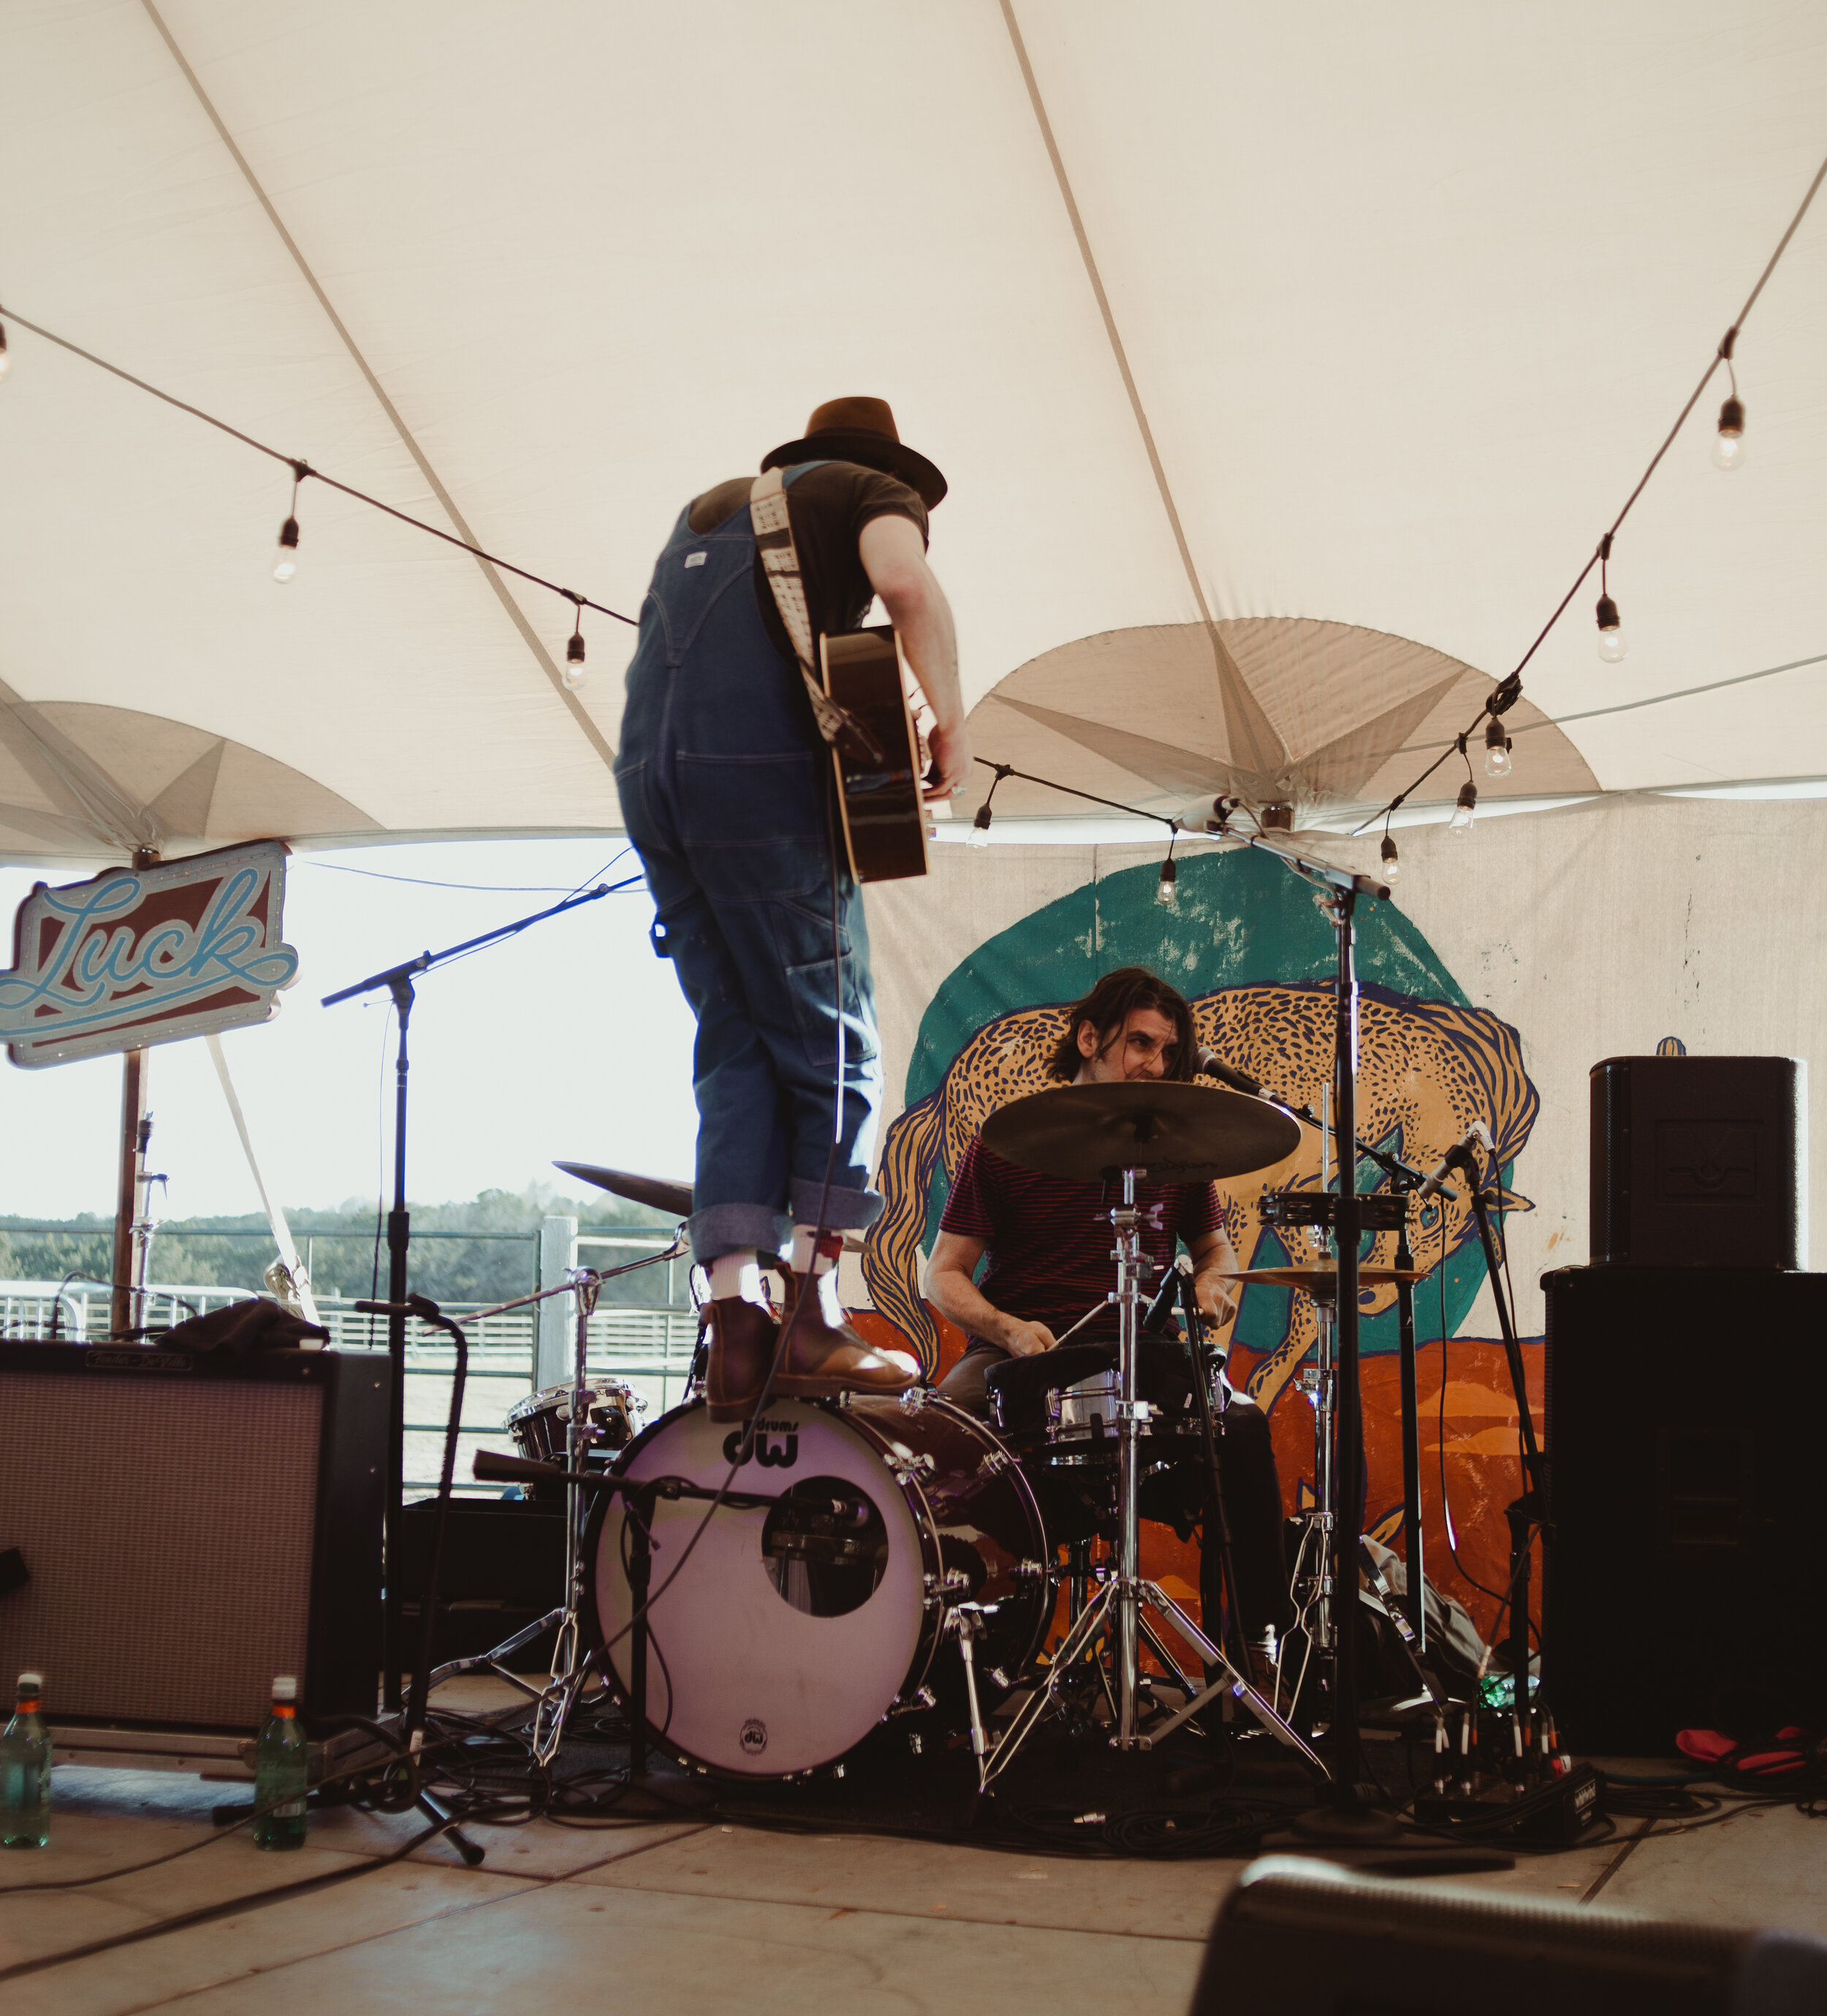 Langhorne Slim & The Law at Luck Reunion in Luck, TX